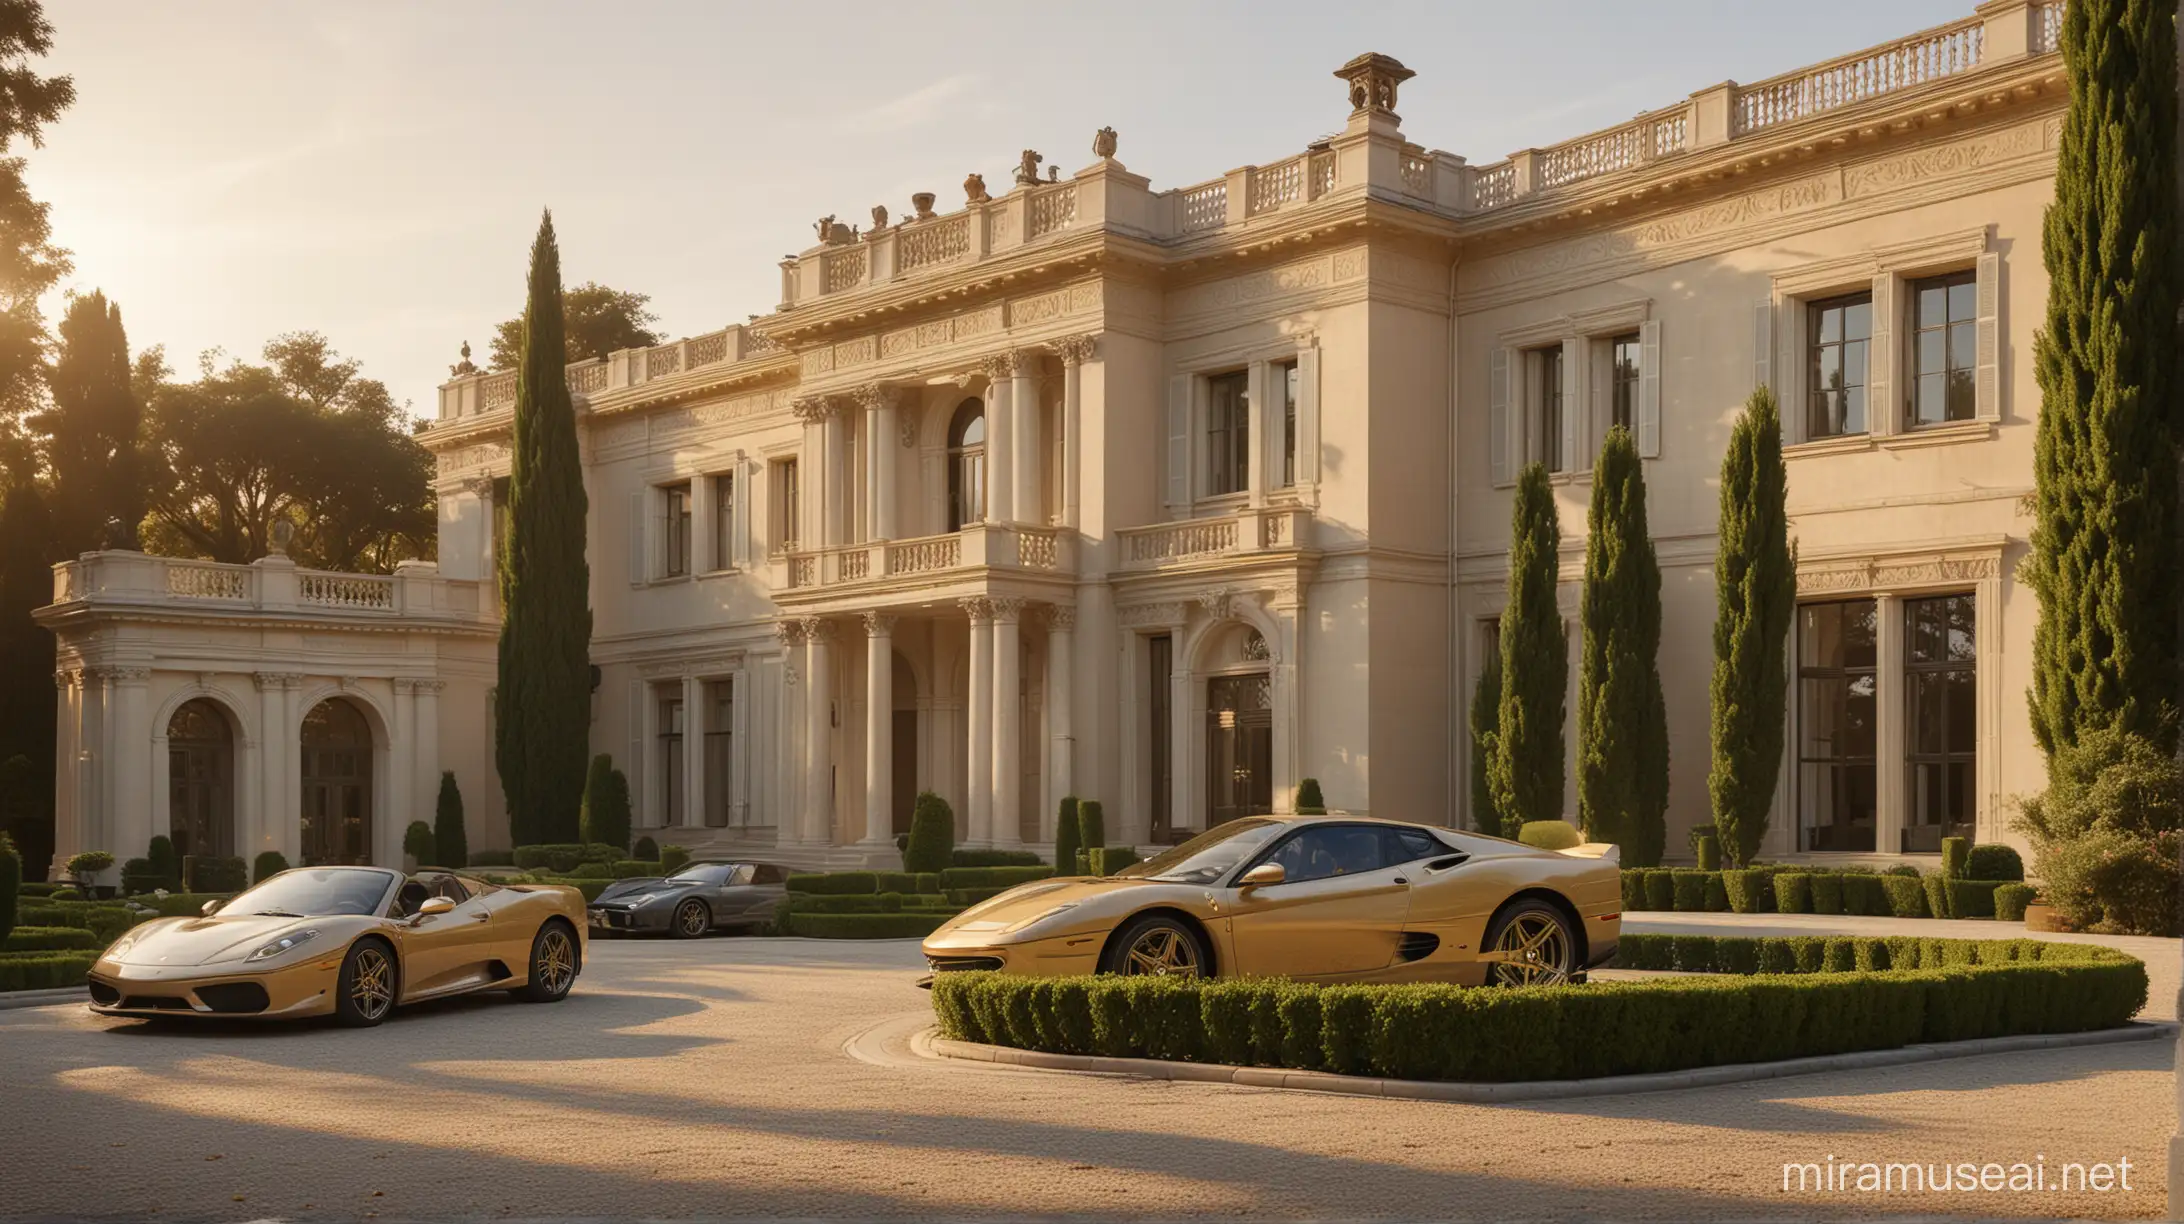 Opulent Beige Neoclassical Mansion with Manicured Gardens and Golden Ferrari